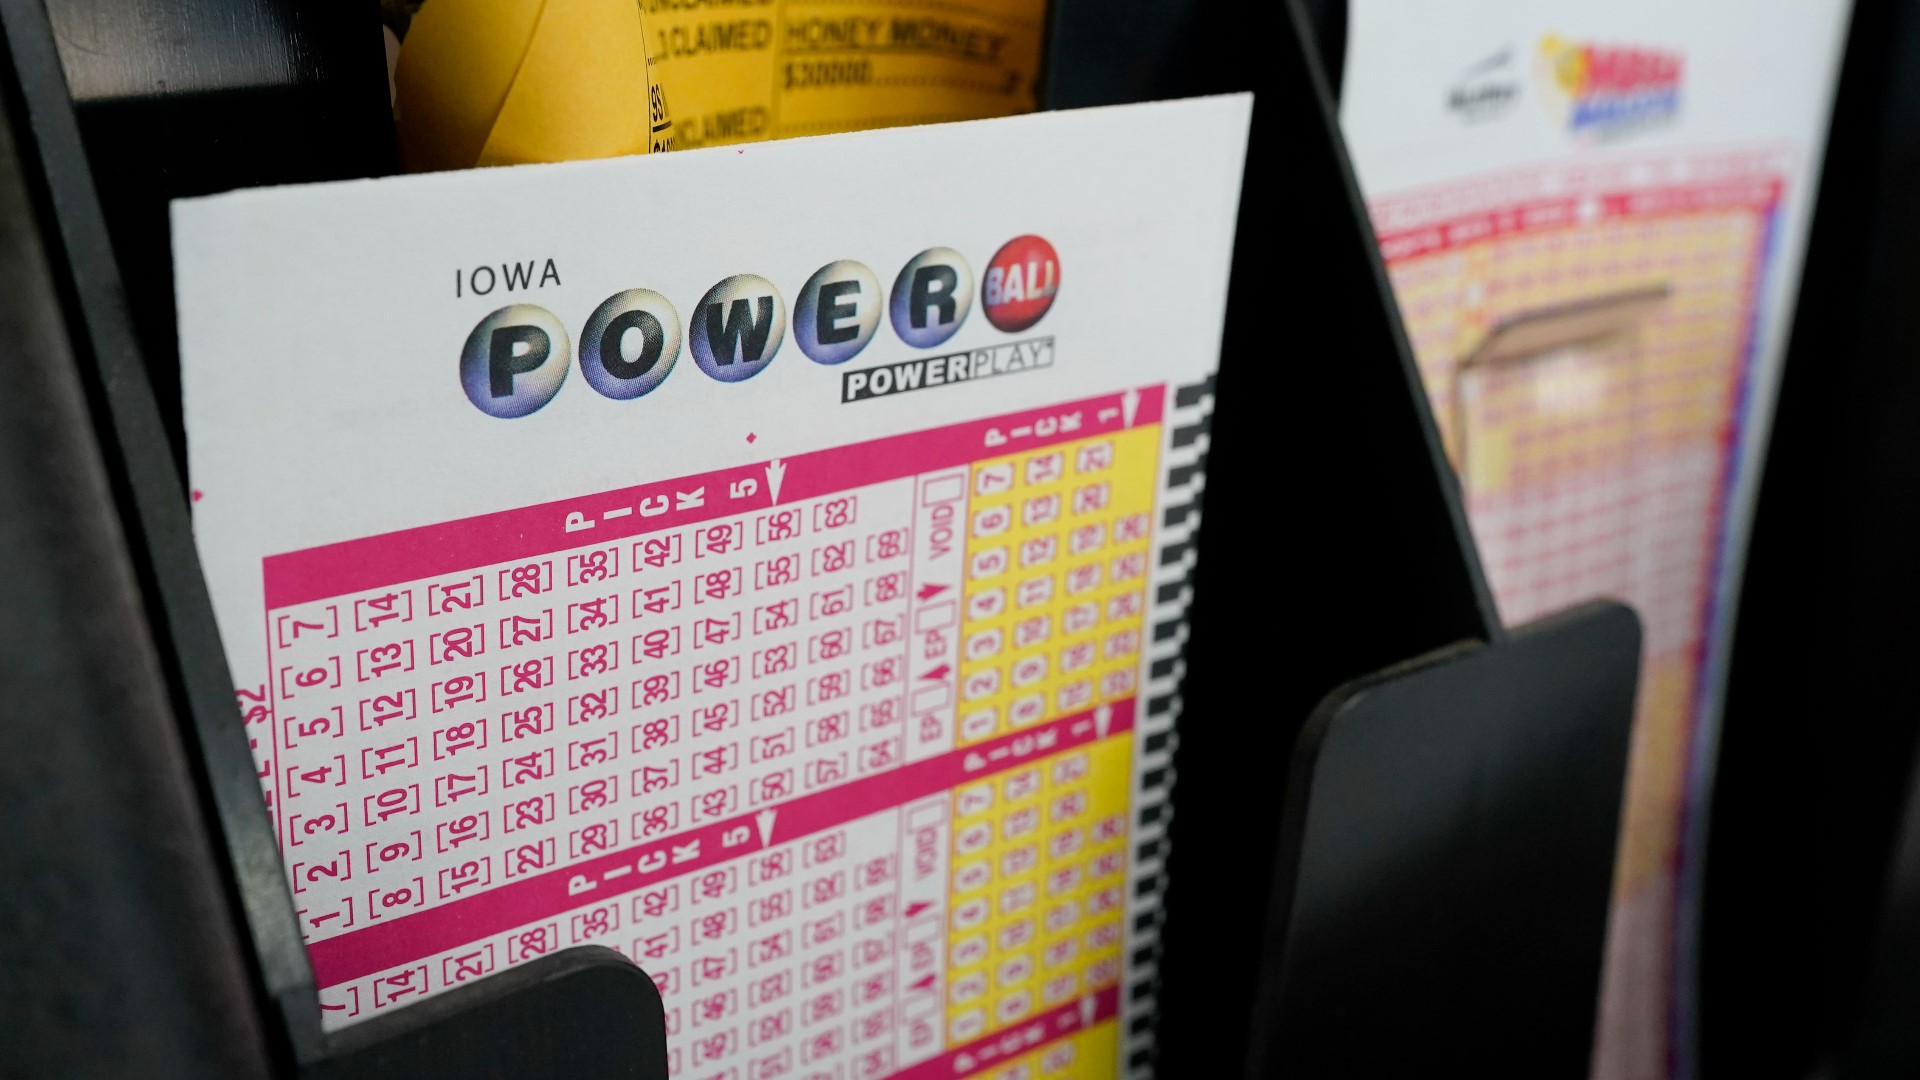 Players must match all five numbers and the Powerball to win the grand prize. The odds of that happening? Less than 1 in 292 million.